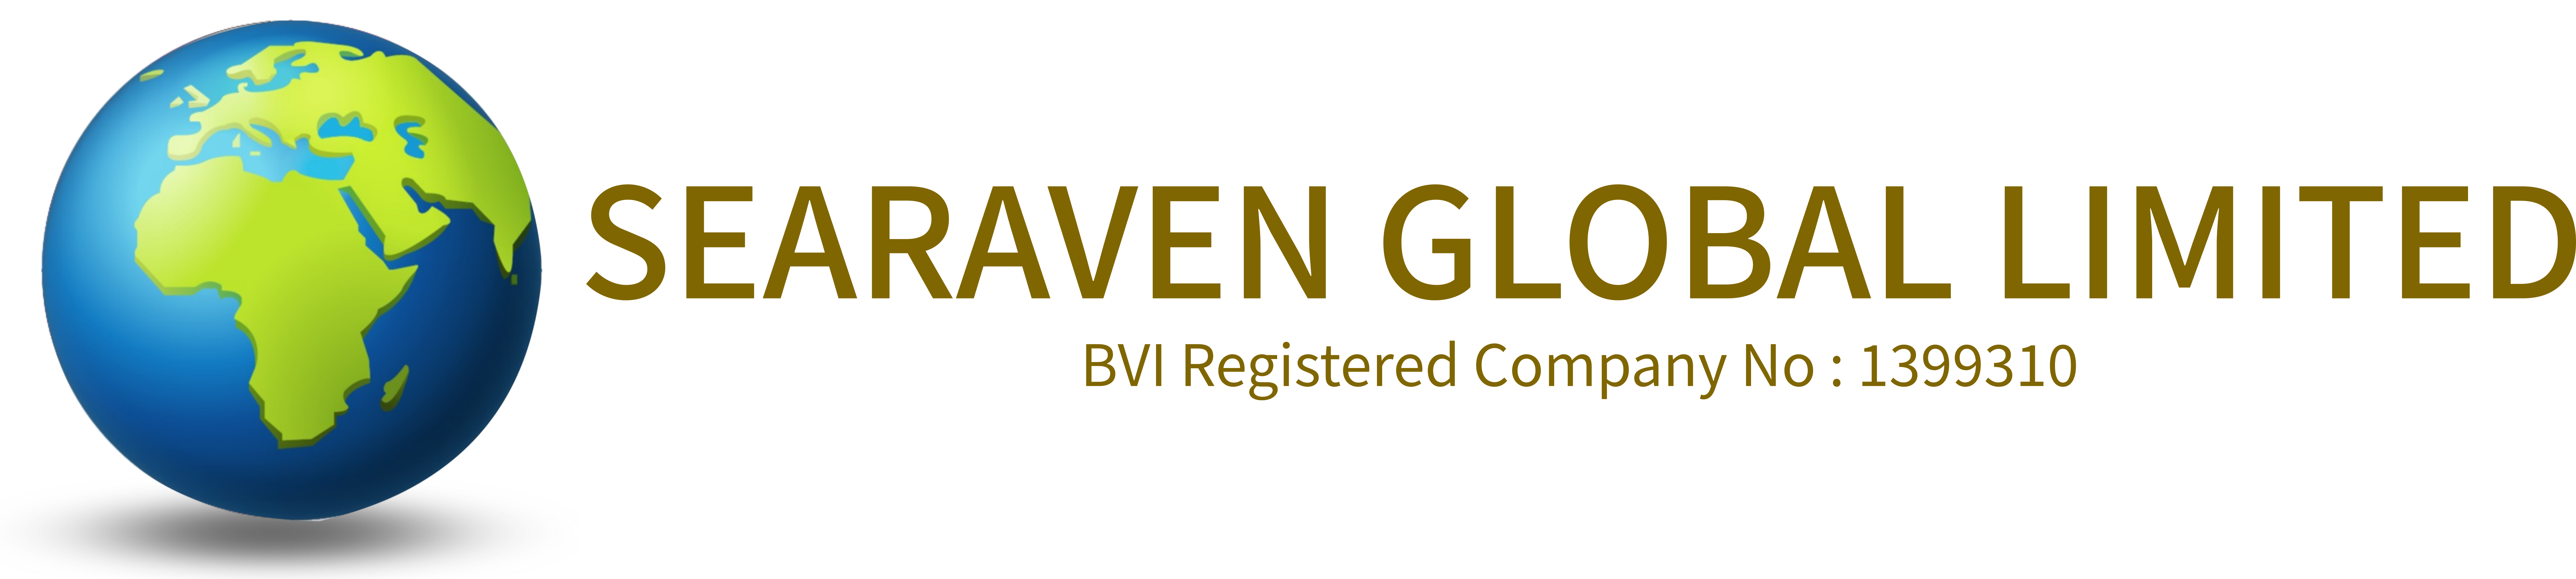 Searaven Global Limited